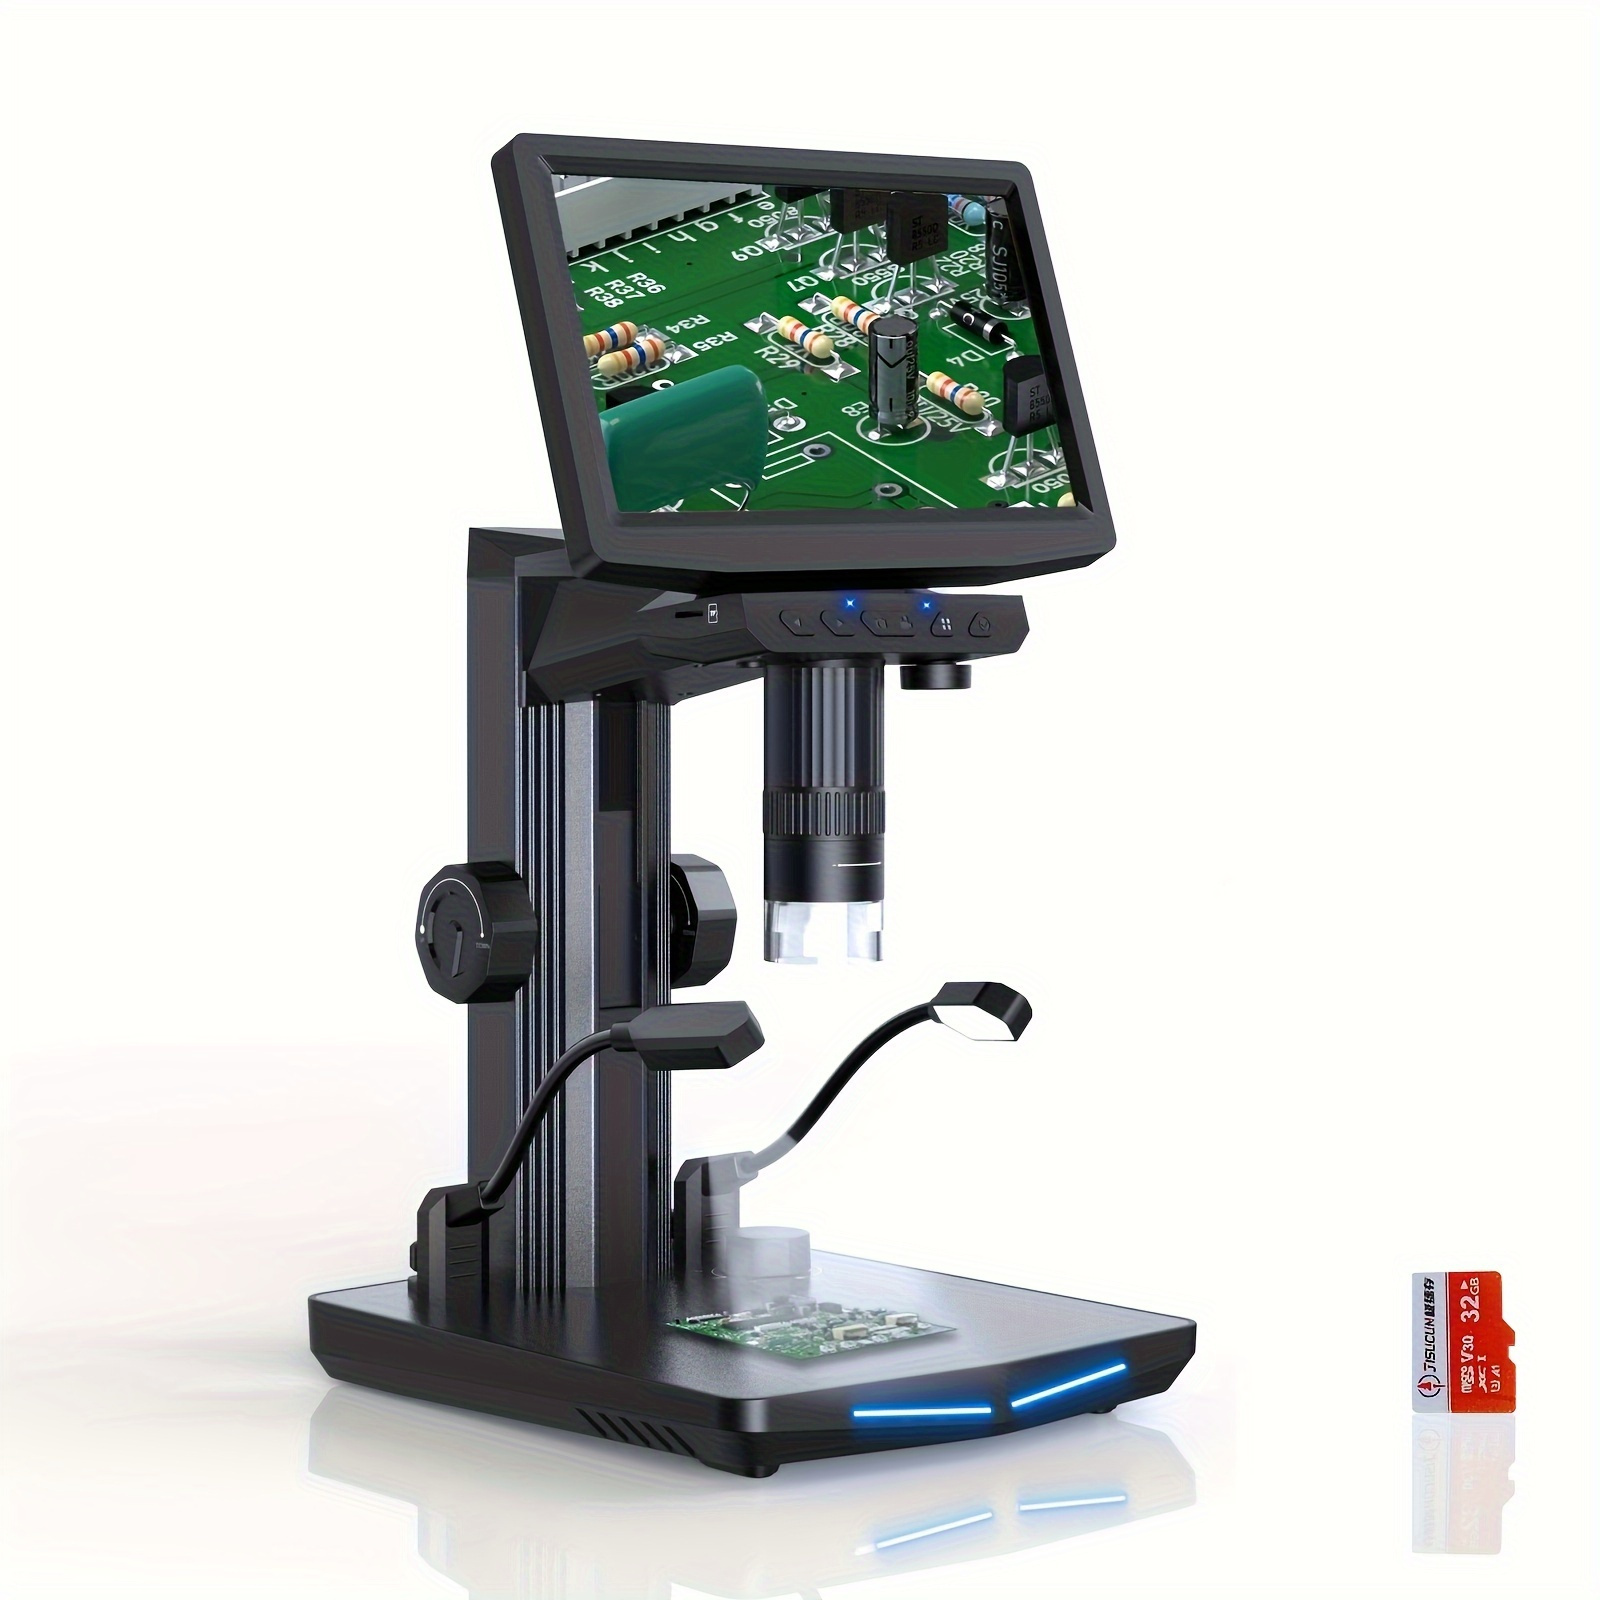 

Digital Microscope For Adults 1600x Magnification With 1080p Ips 7" Screen Usb Digital Microscope For Soldering, Electronics Repair, Coins, Compatible With Windows//tv With 64gb Card